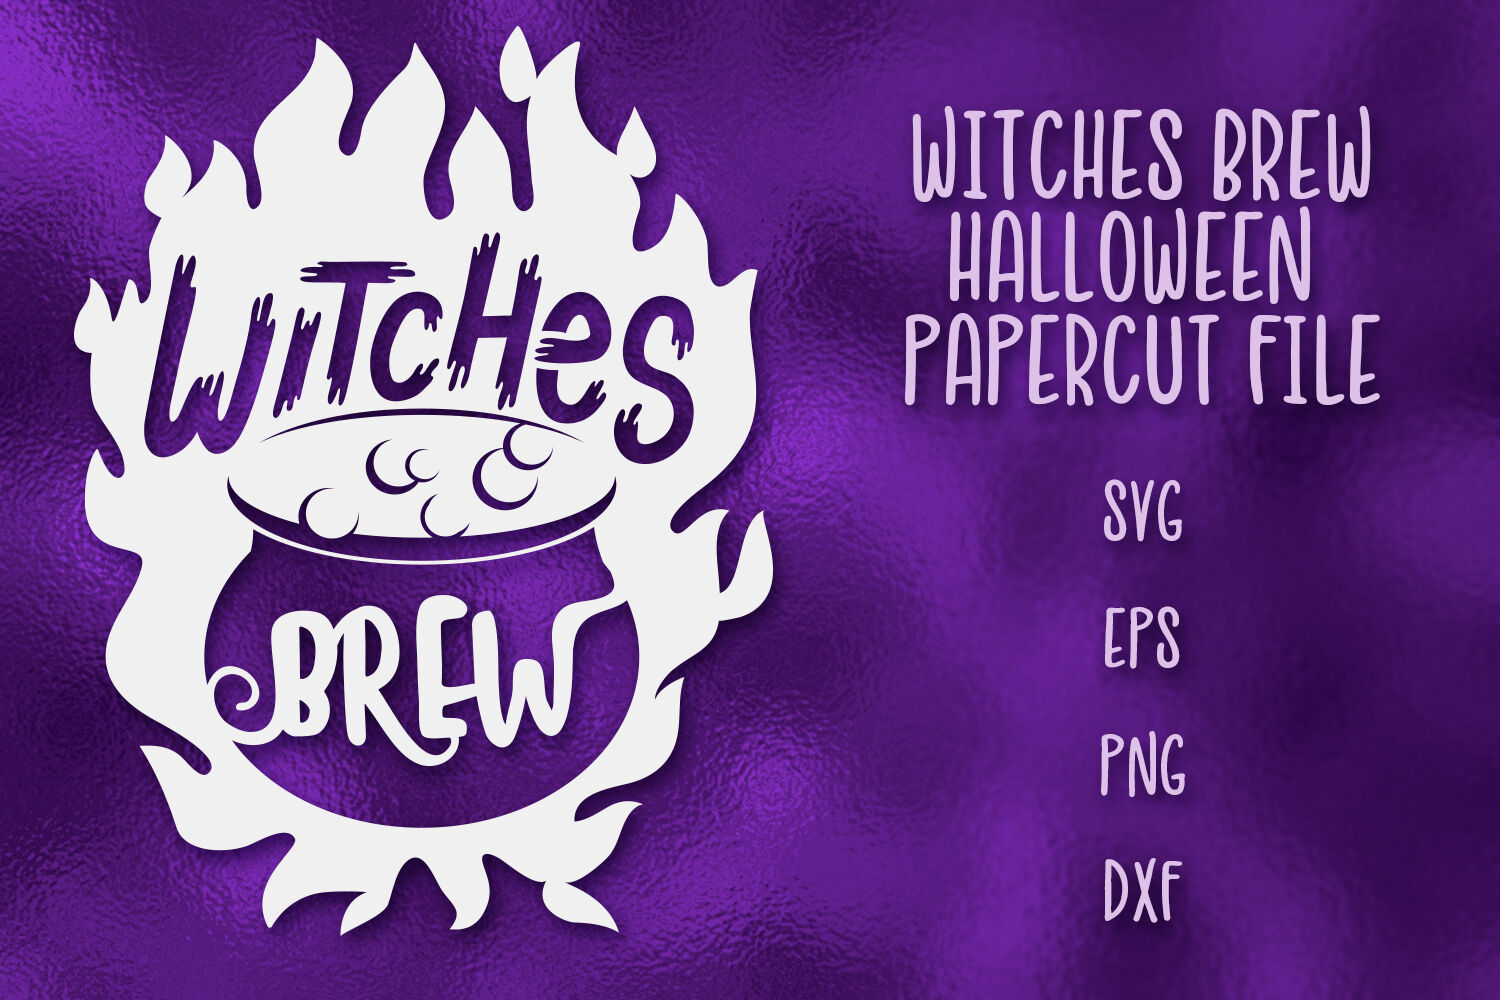 Witches Brew Halloween Svg Papercut File By Tatiana Cociorva Designs Thehungryjpeg Com